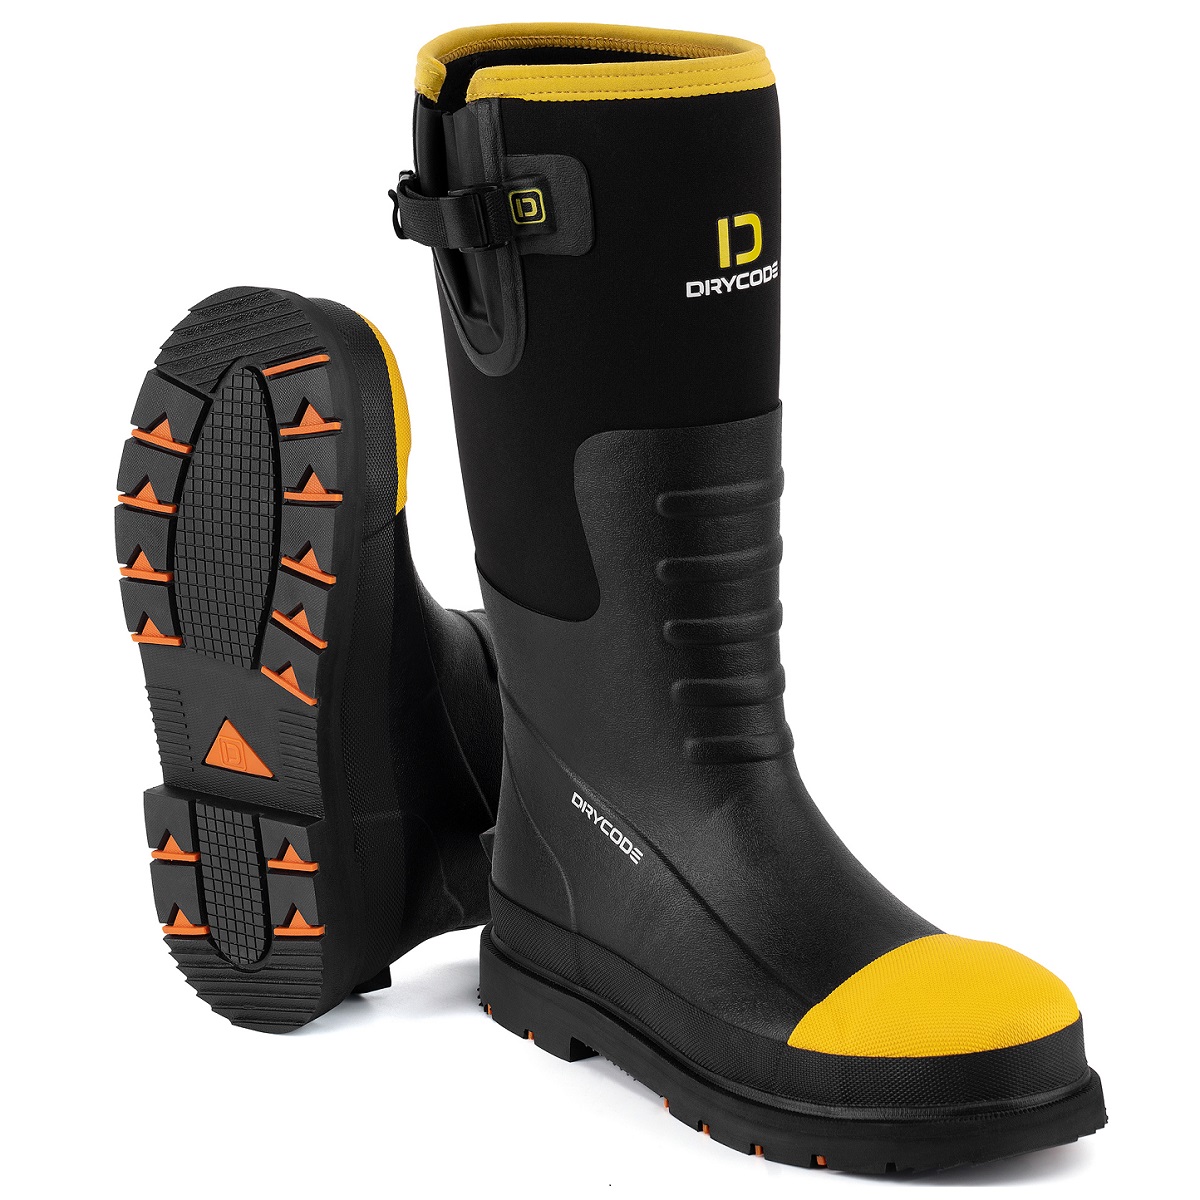 DRYCODE Rubber Work Boots for Men with Steel Toe & Shank